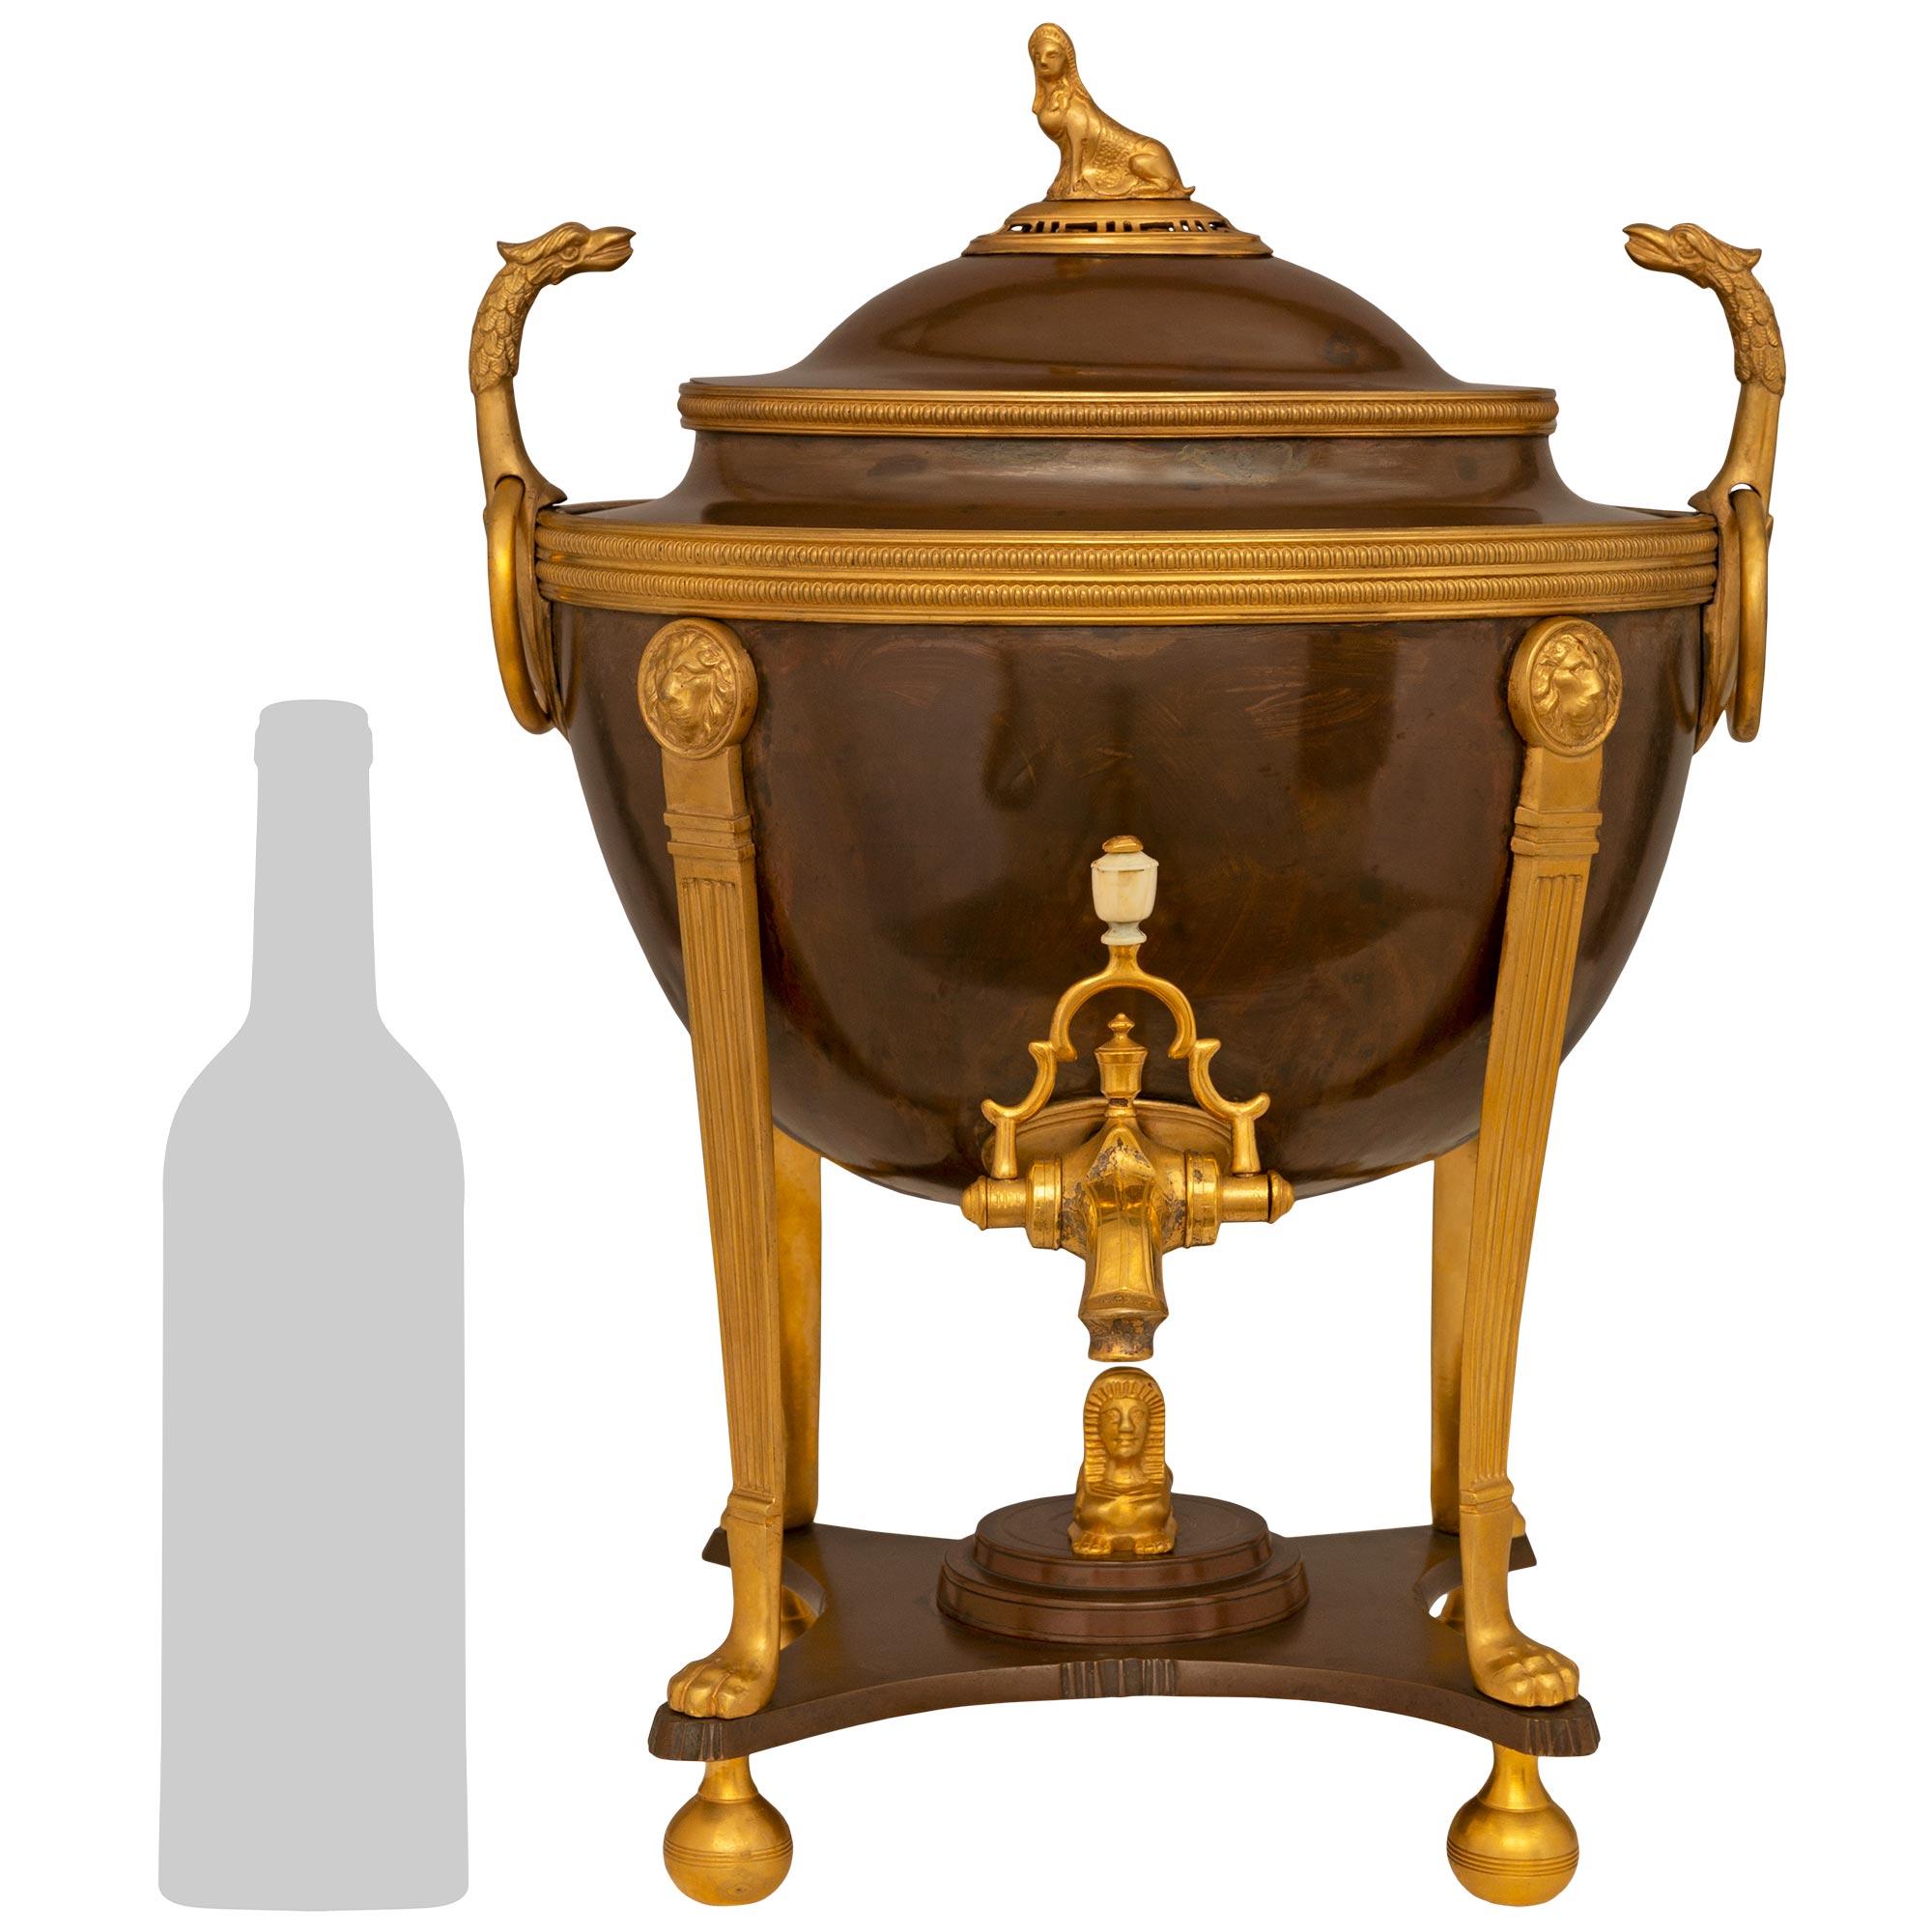 An exquisite French 19th century Neo-Classical st. Patinated Bronze and Ormolu Samovar. The most decorative hot water server is raised on Ormolu ball feet below a Patinated Bronze tier with concave sides. The tier has a central stepped platform